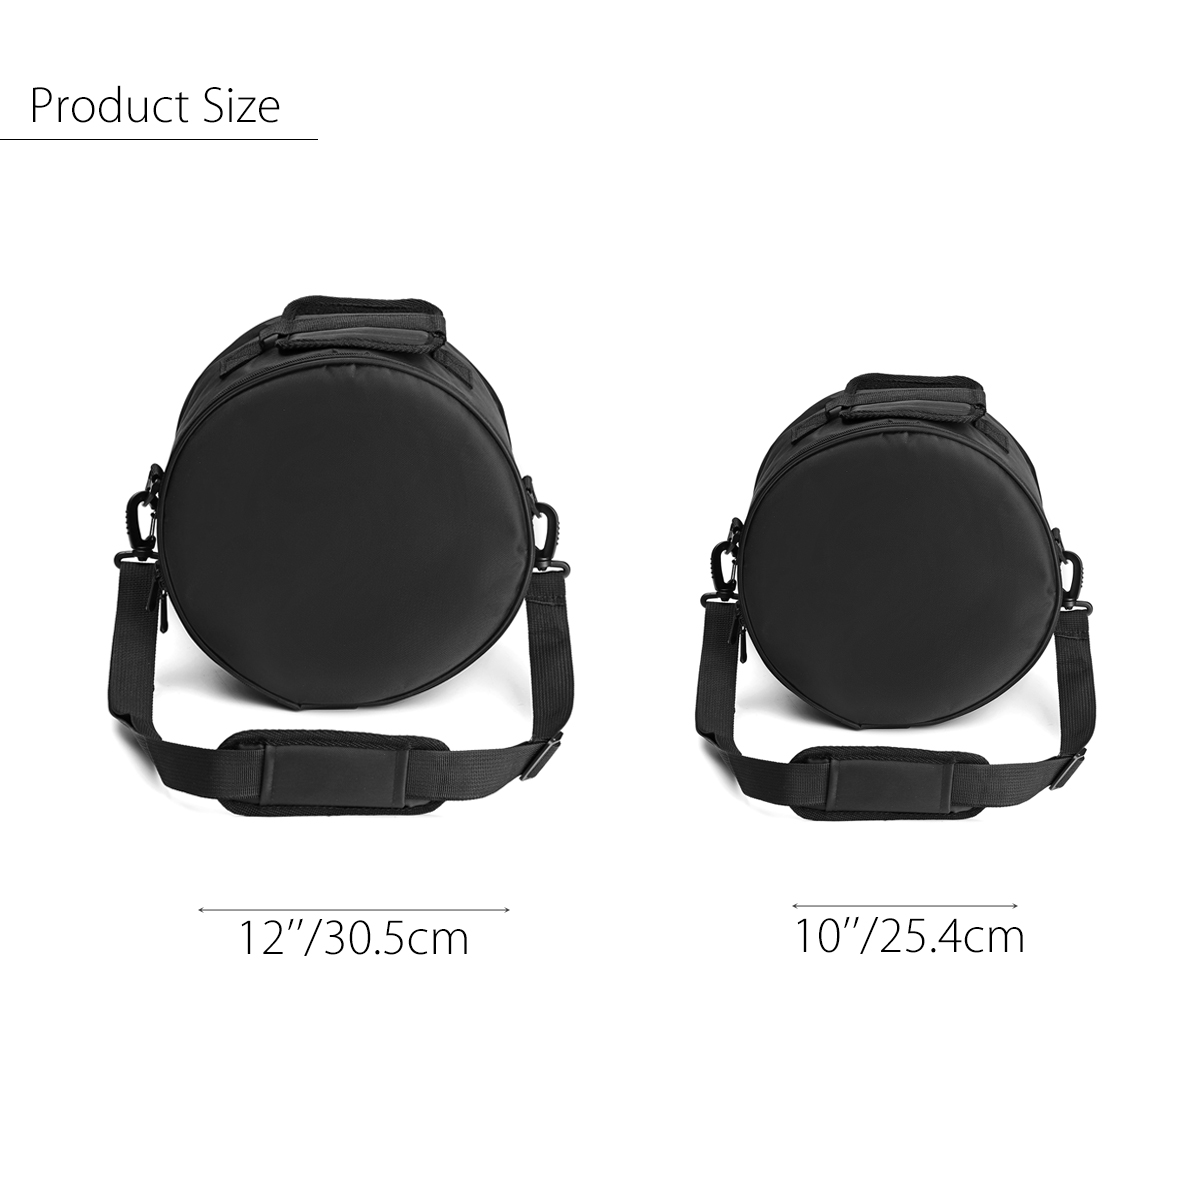 Steel-Tongue-Drum-Bag-Storage-Punch-Soulder-Crossbody-Bag-For-Outdoor-Camping-Leisure-Wear-1357124-4